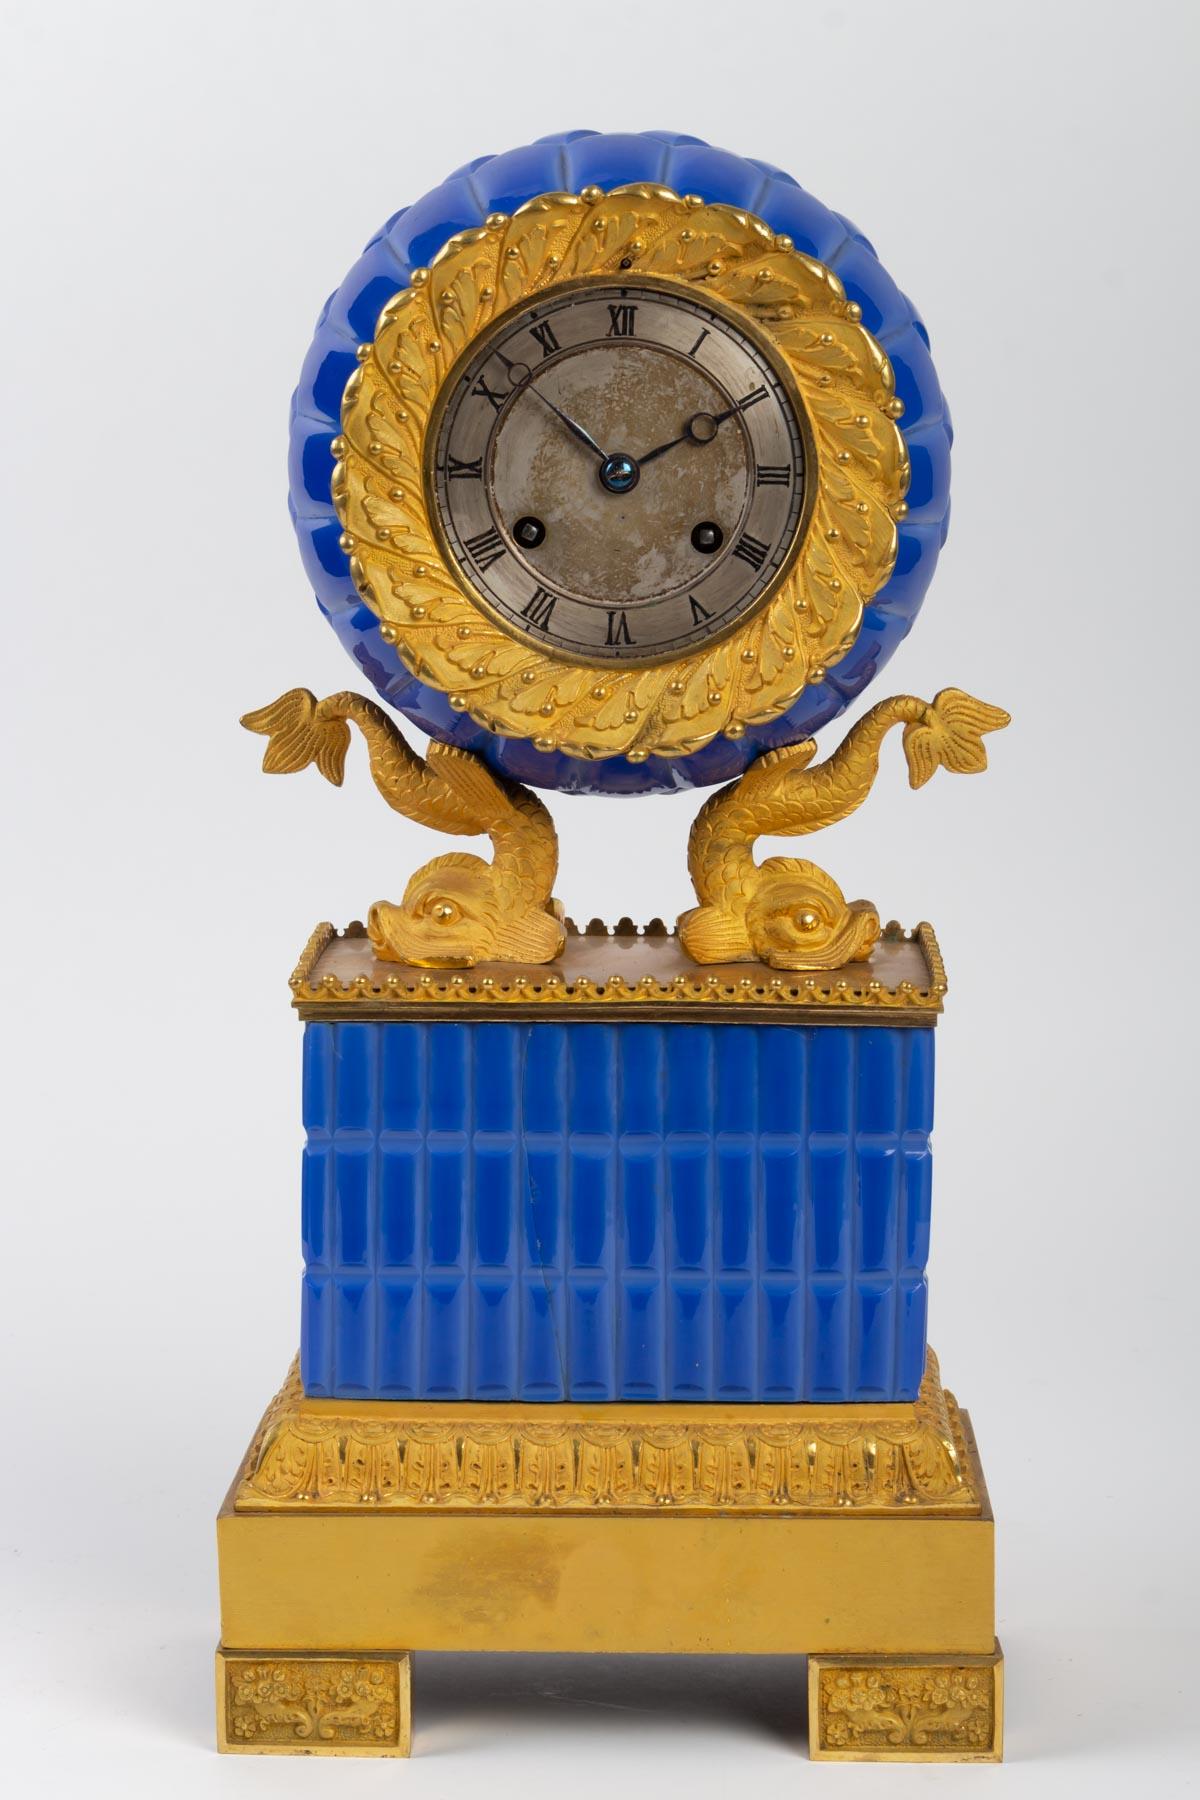 Charles X period clock, in opaline and golden bronze, high quality.
Measures: H 39 cm, W 18.5 cm, D 11 cm.